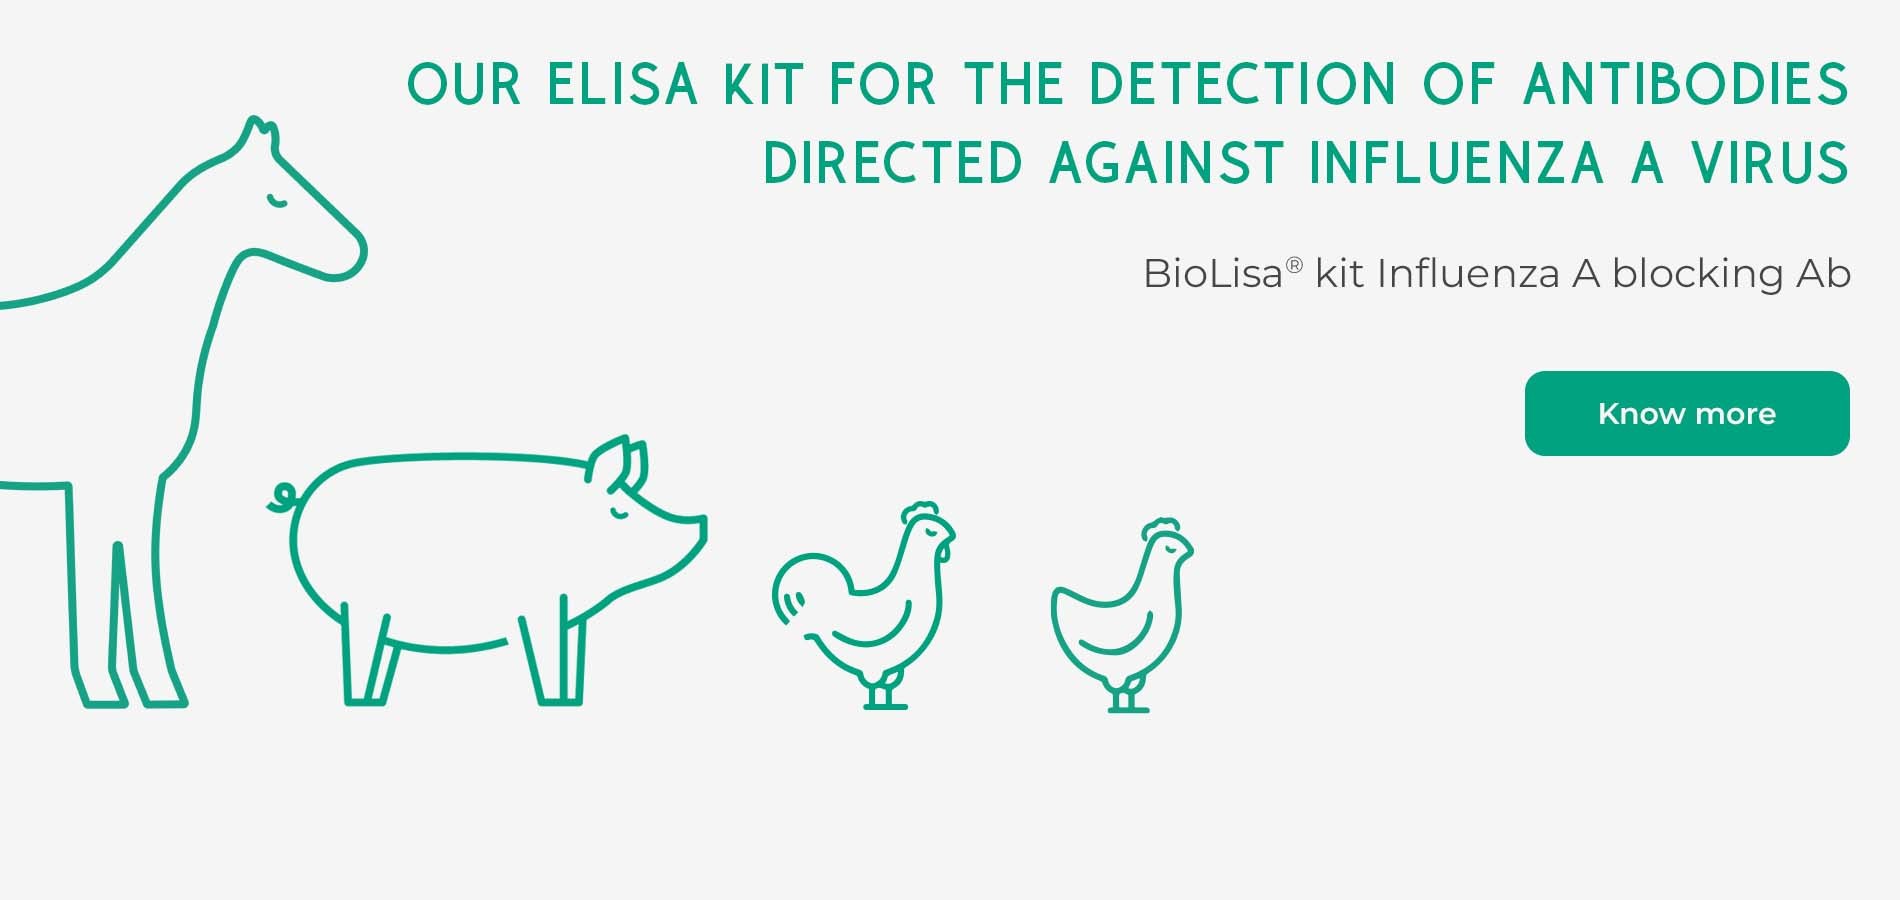 ELISA kit for the detection of antibodies directed against Influenza A virus